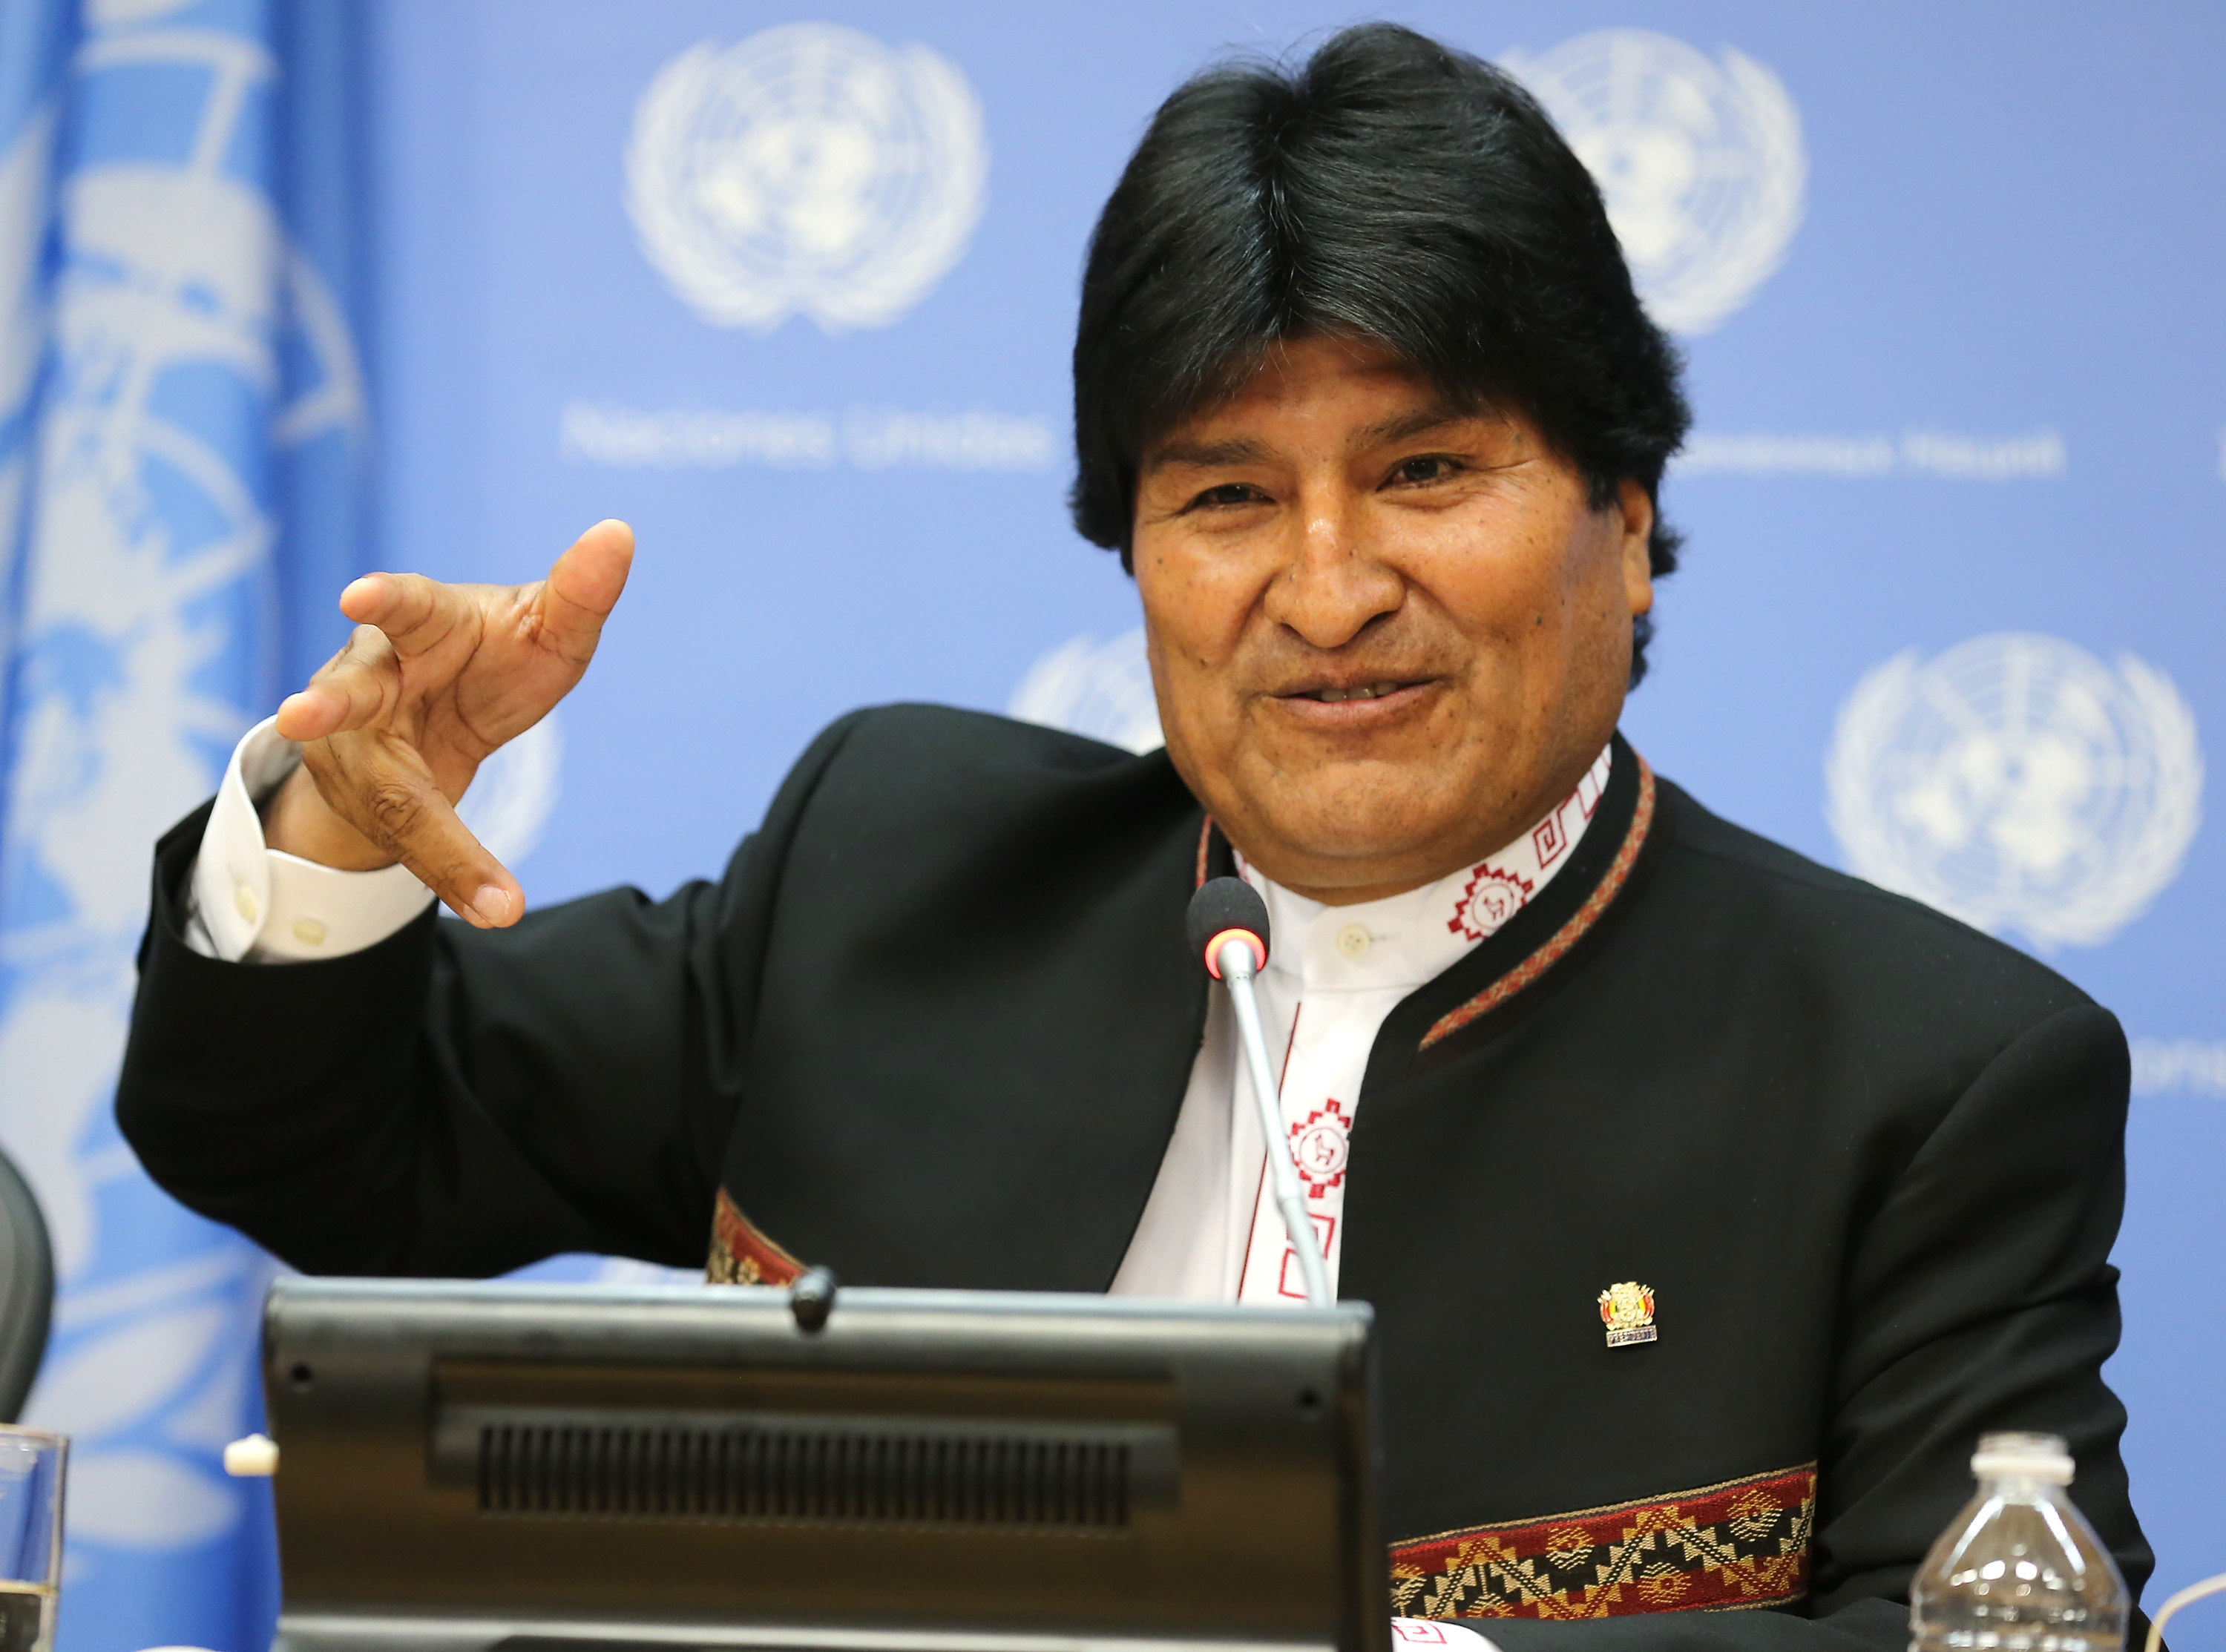 President of Bolivia Evo Morales Ayma speaks during a press conference at United Nations on April 21, 2016 in New York City. (Jemal Countess—Getty Images)